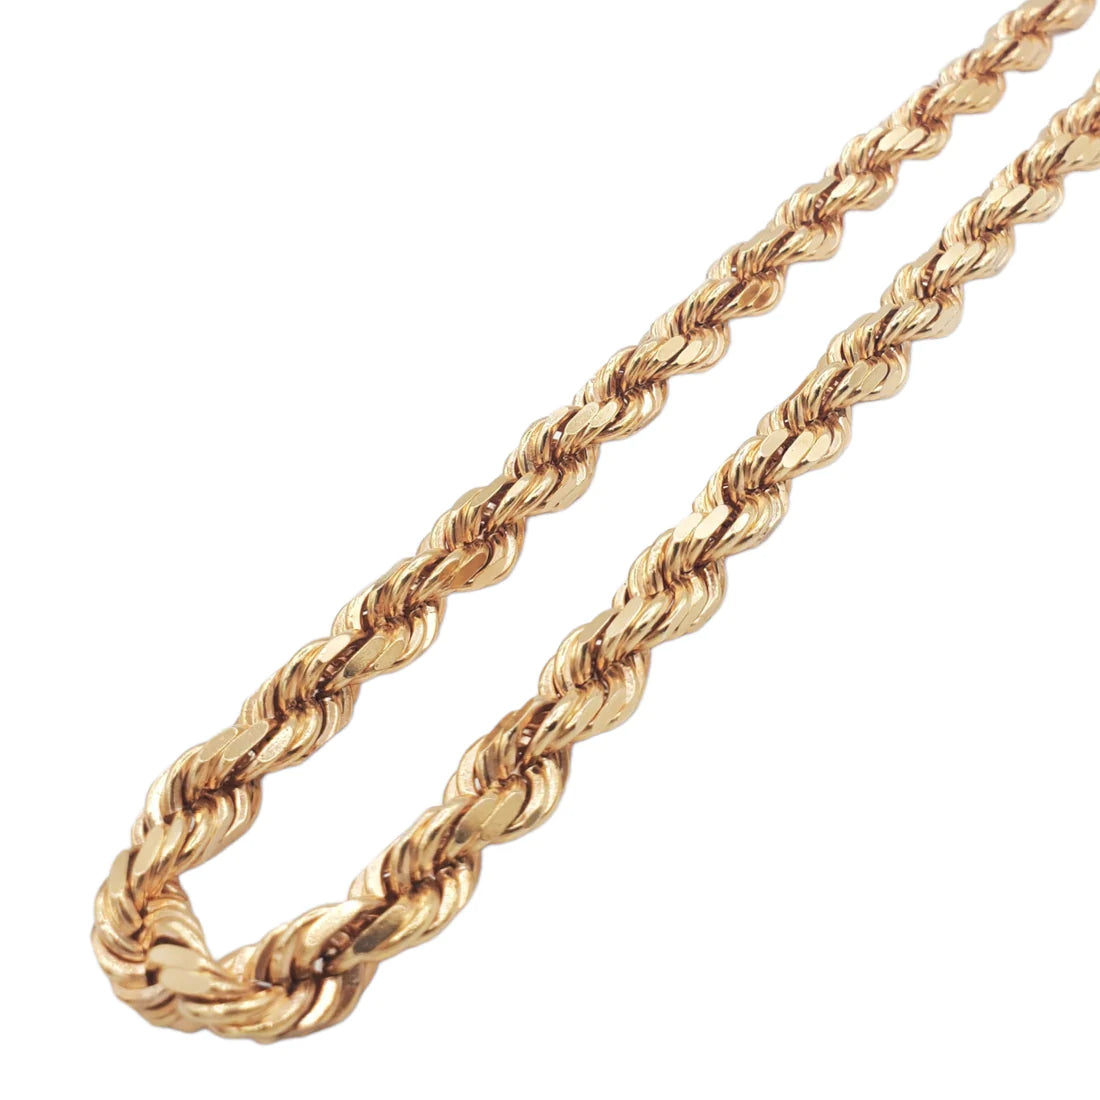 14K 2.5mm Hollow Rope Chain